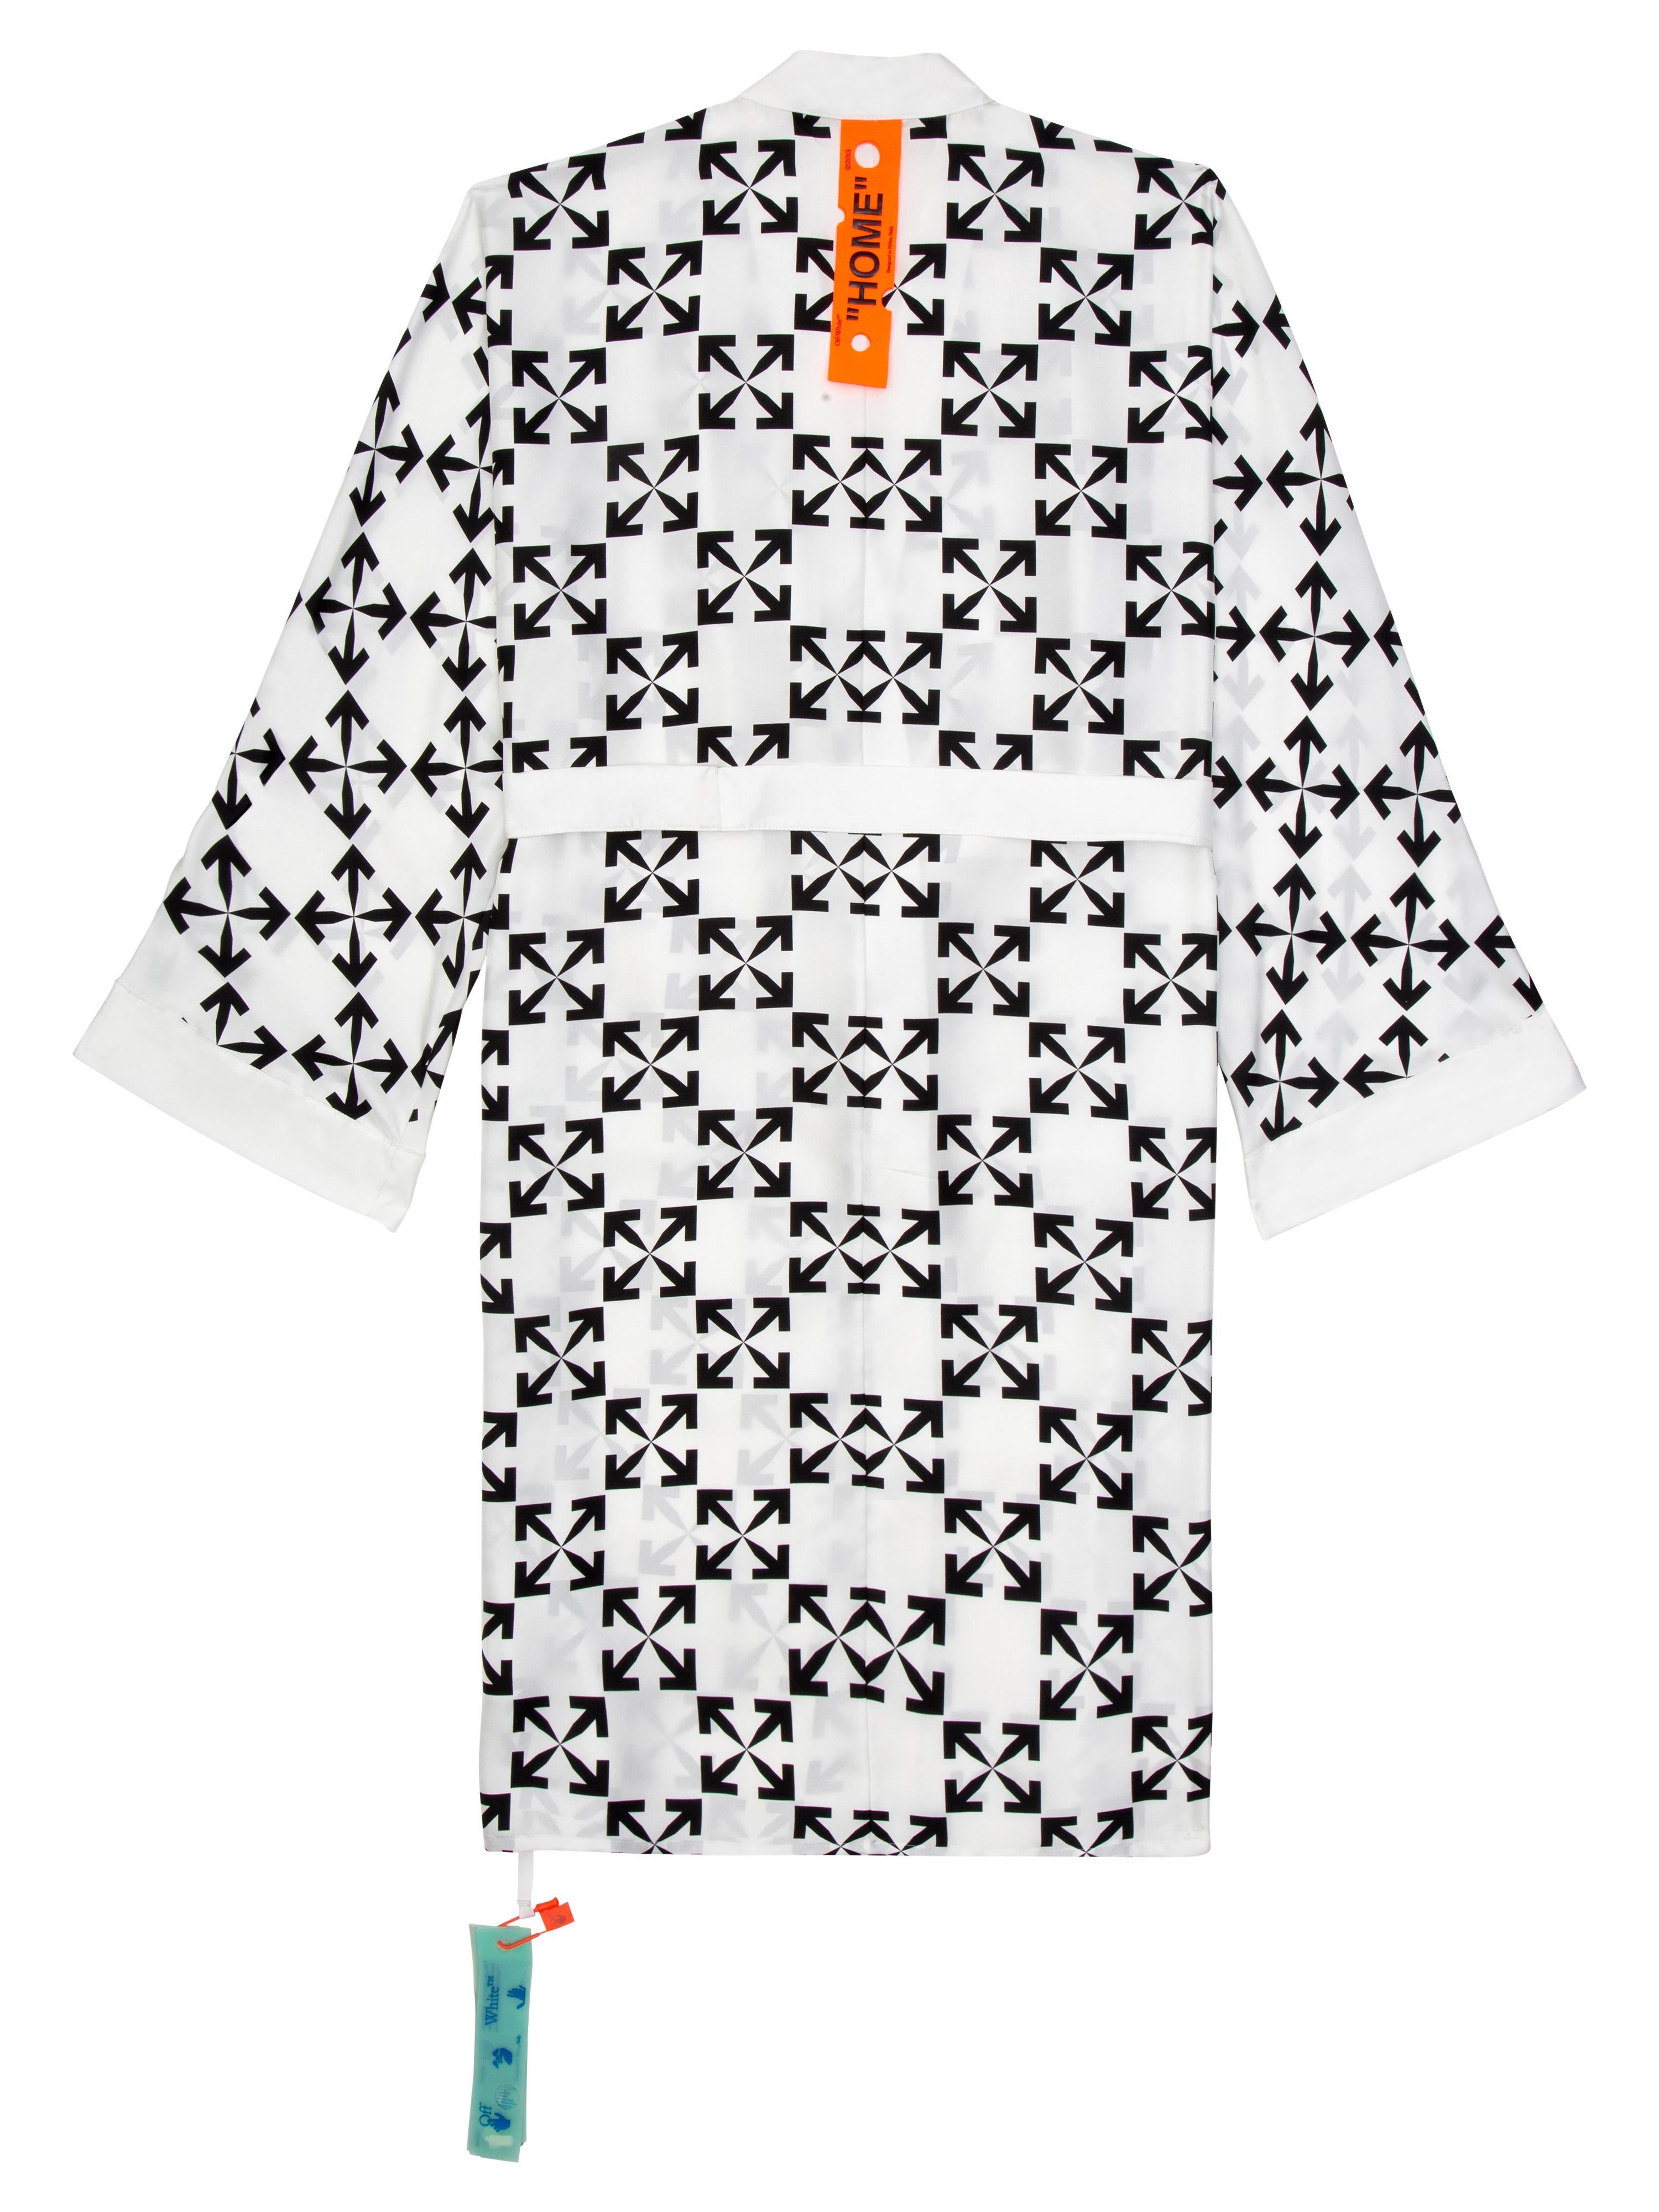 Silk Robe with belt in black arrow pattern on a white base. HOME orange loop on the back.
By Virgil Abloh
Size: Small
This item is only available to be purchased and shipped to the United States.
  